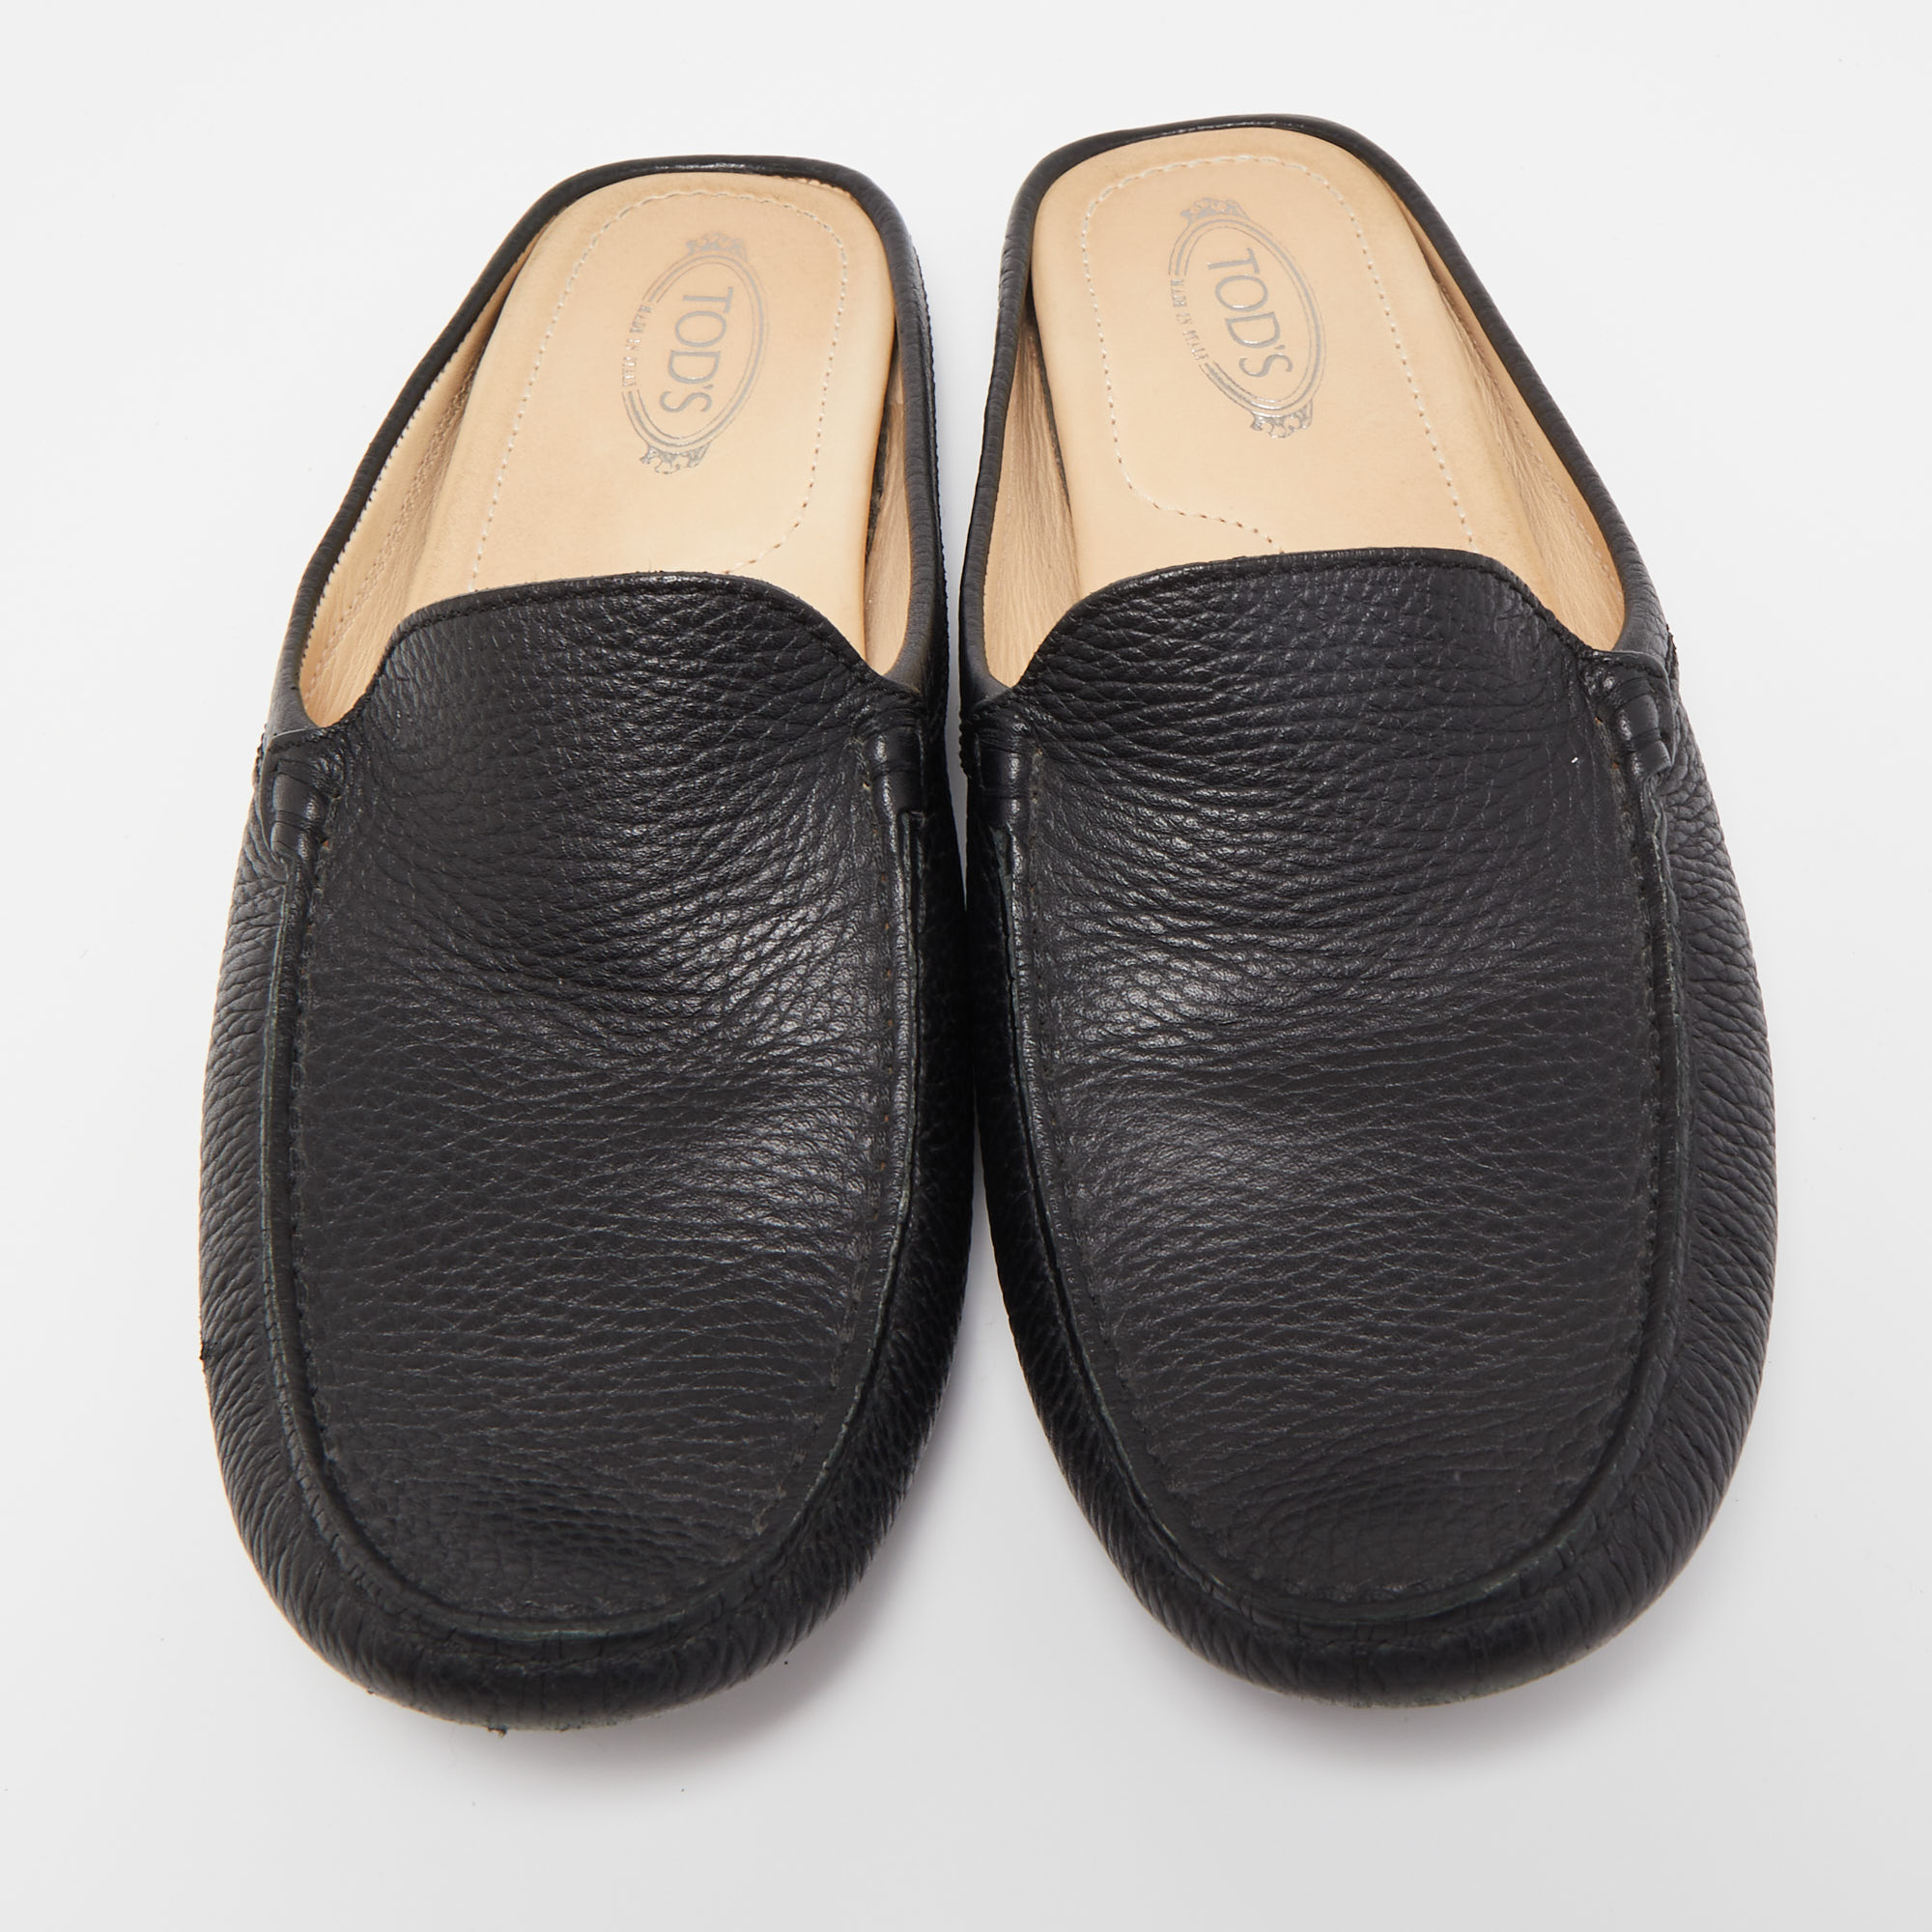 Tod's Black Leather Flat Loafer Mules Size 39